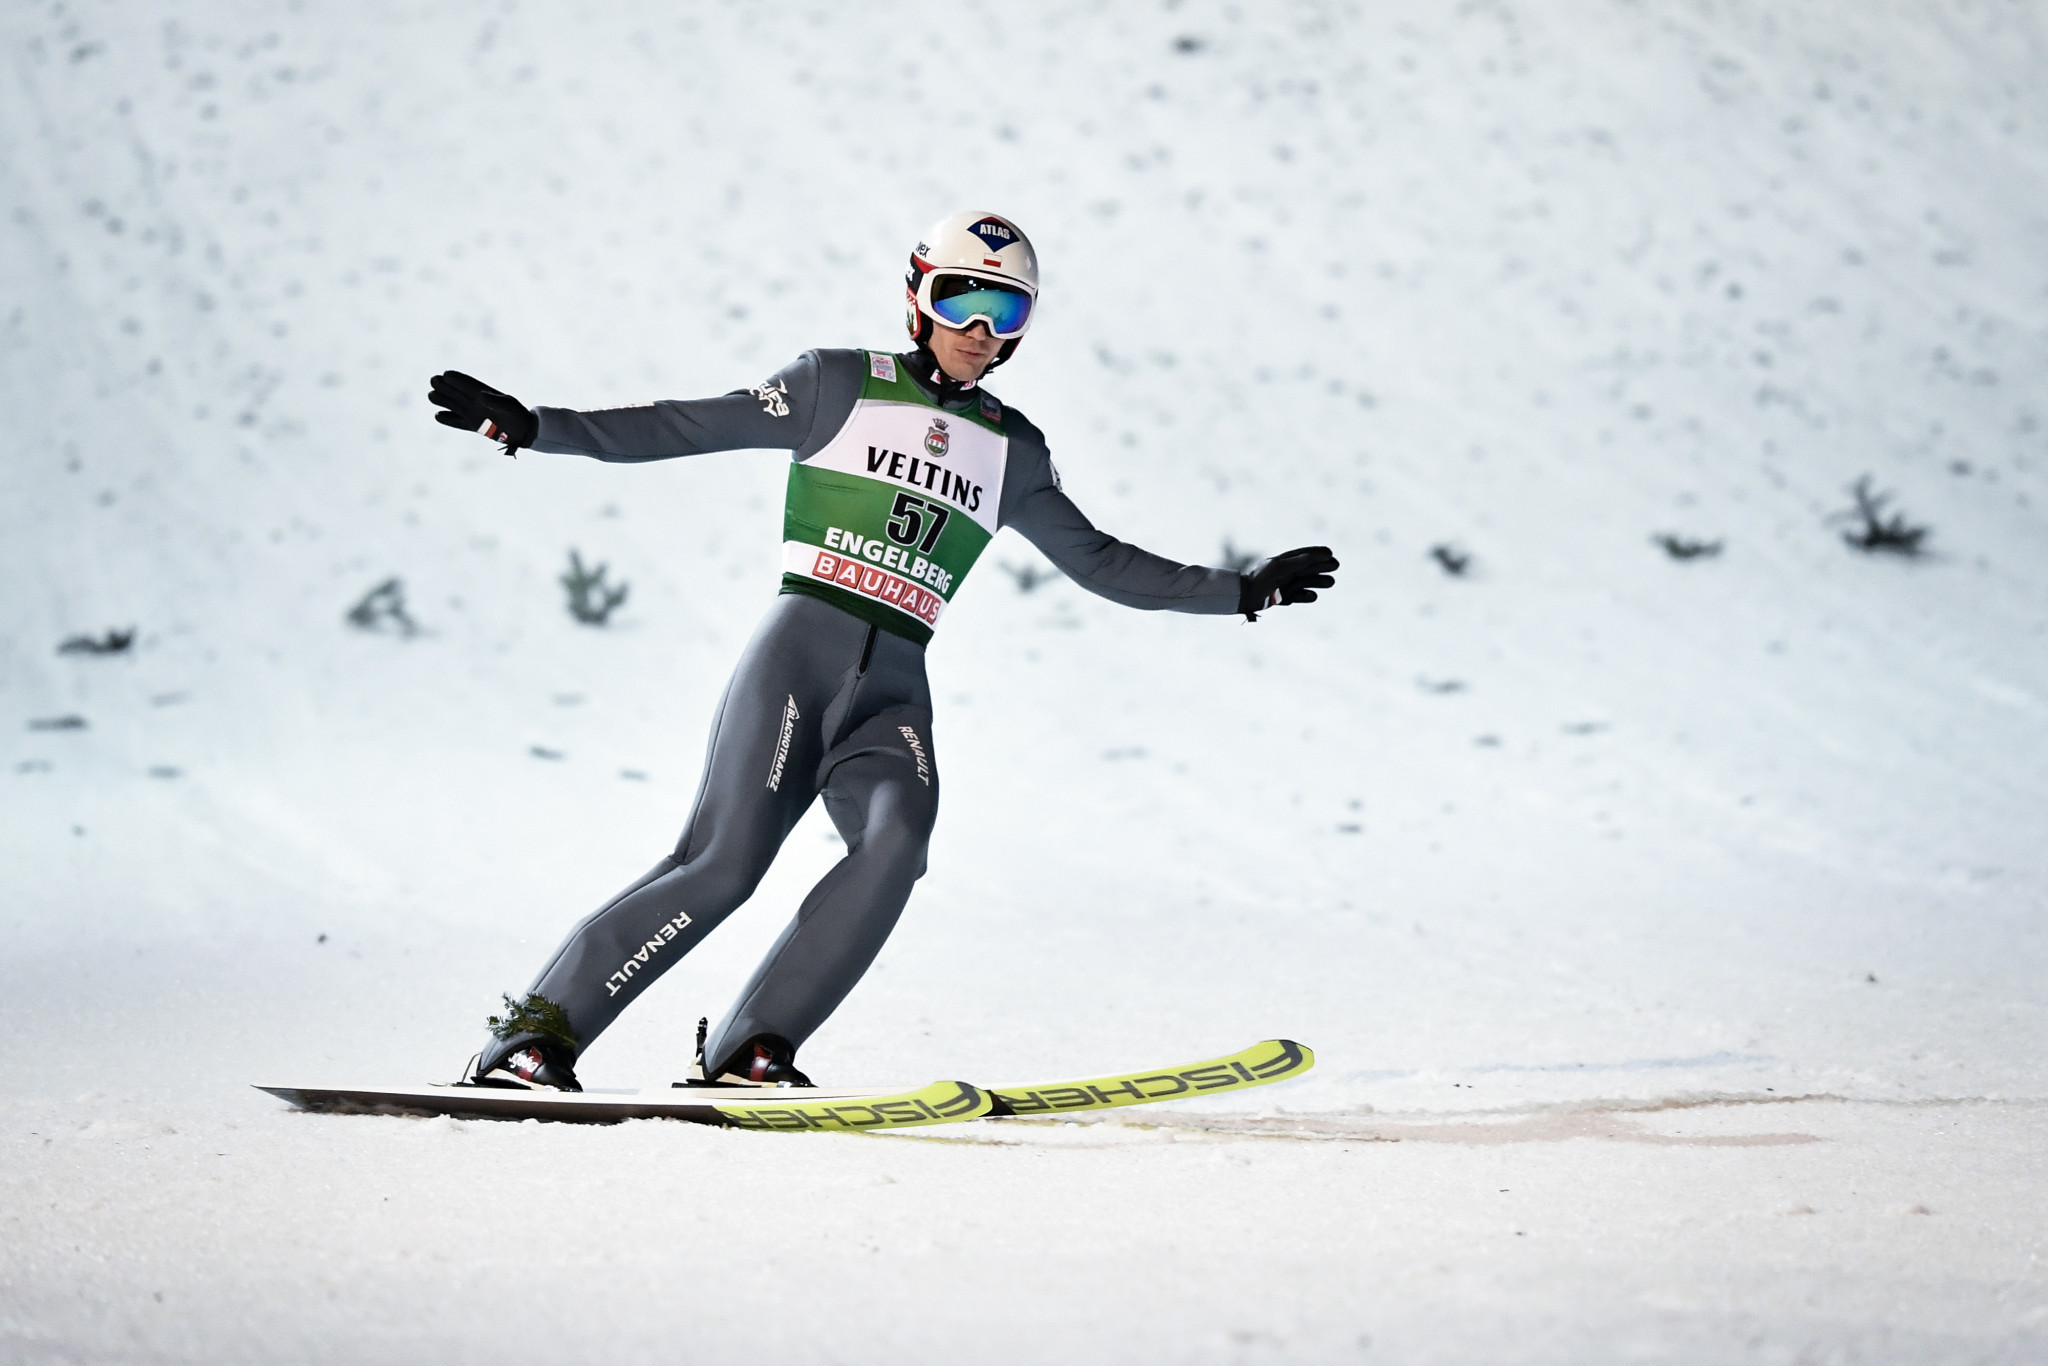 Stoch earns narrow victory at FIS Ski Jumping World Cup in Engelberg